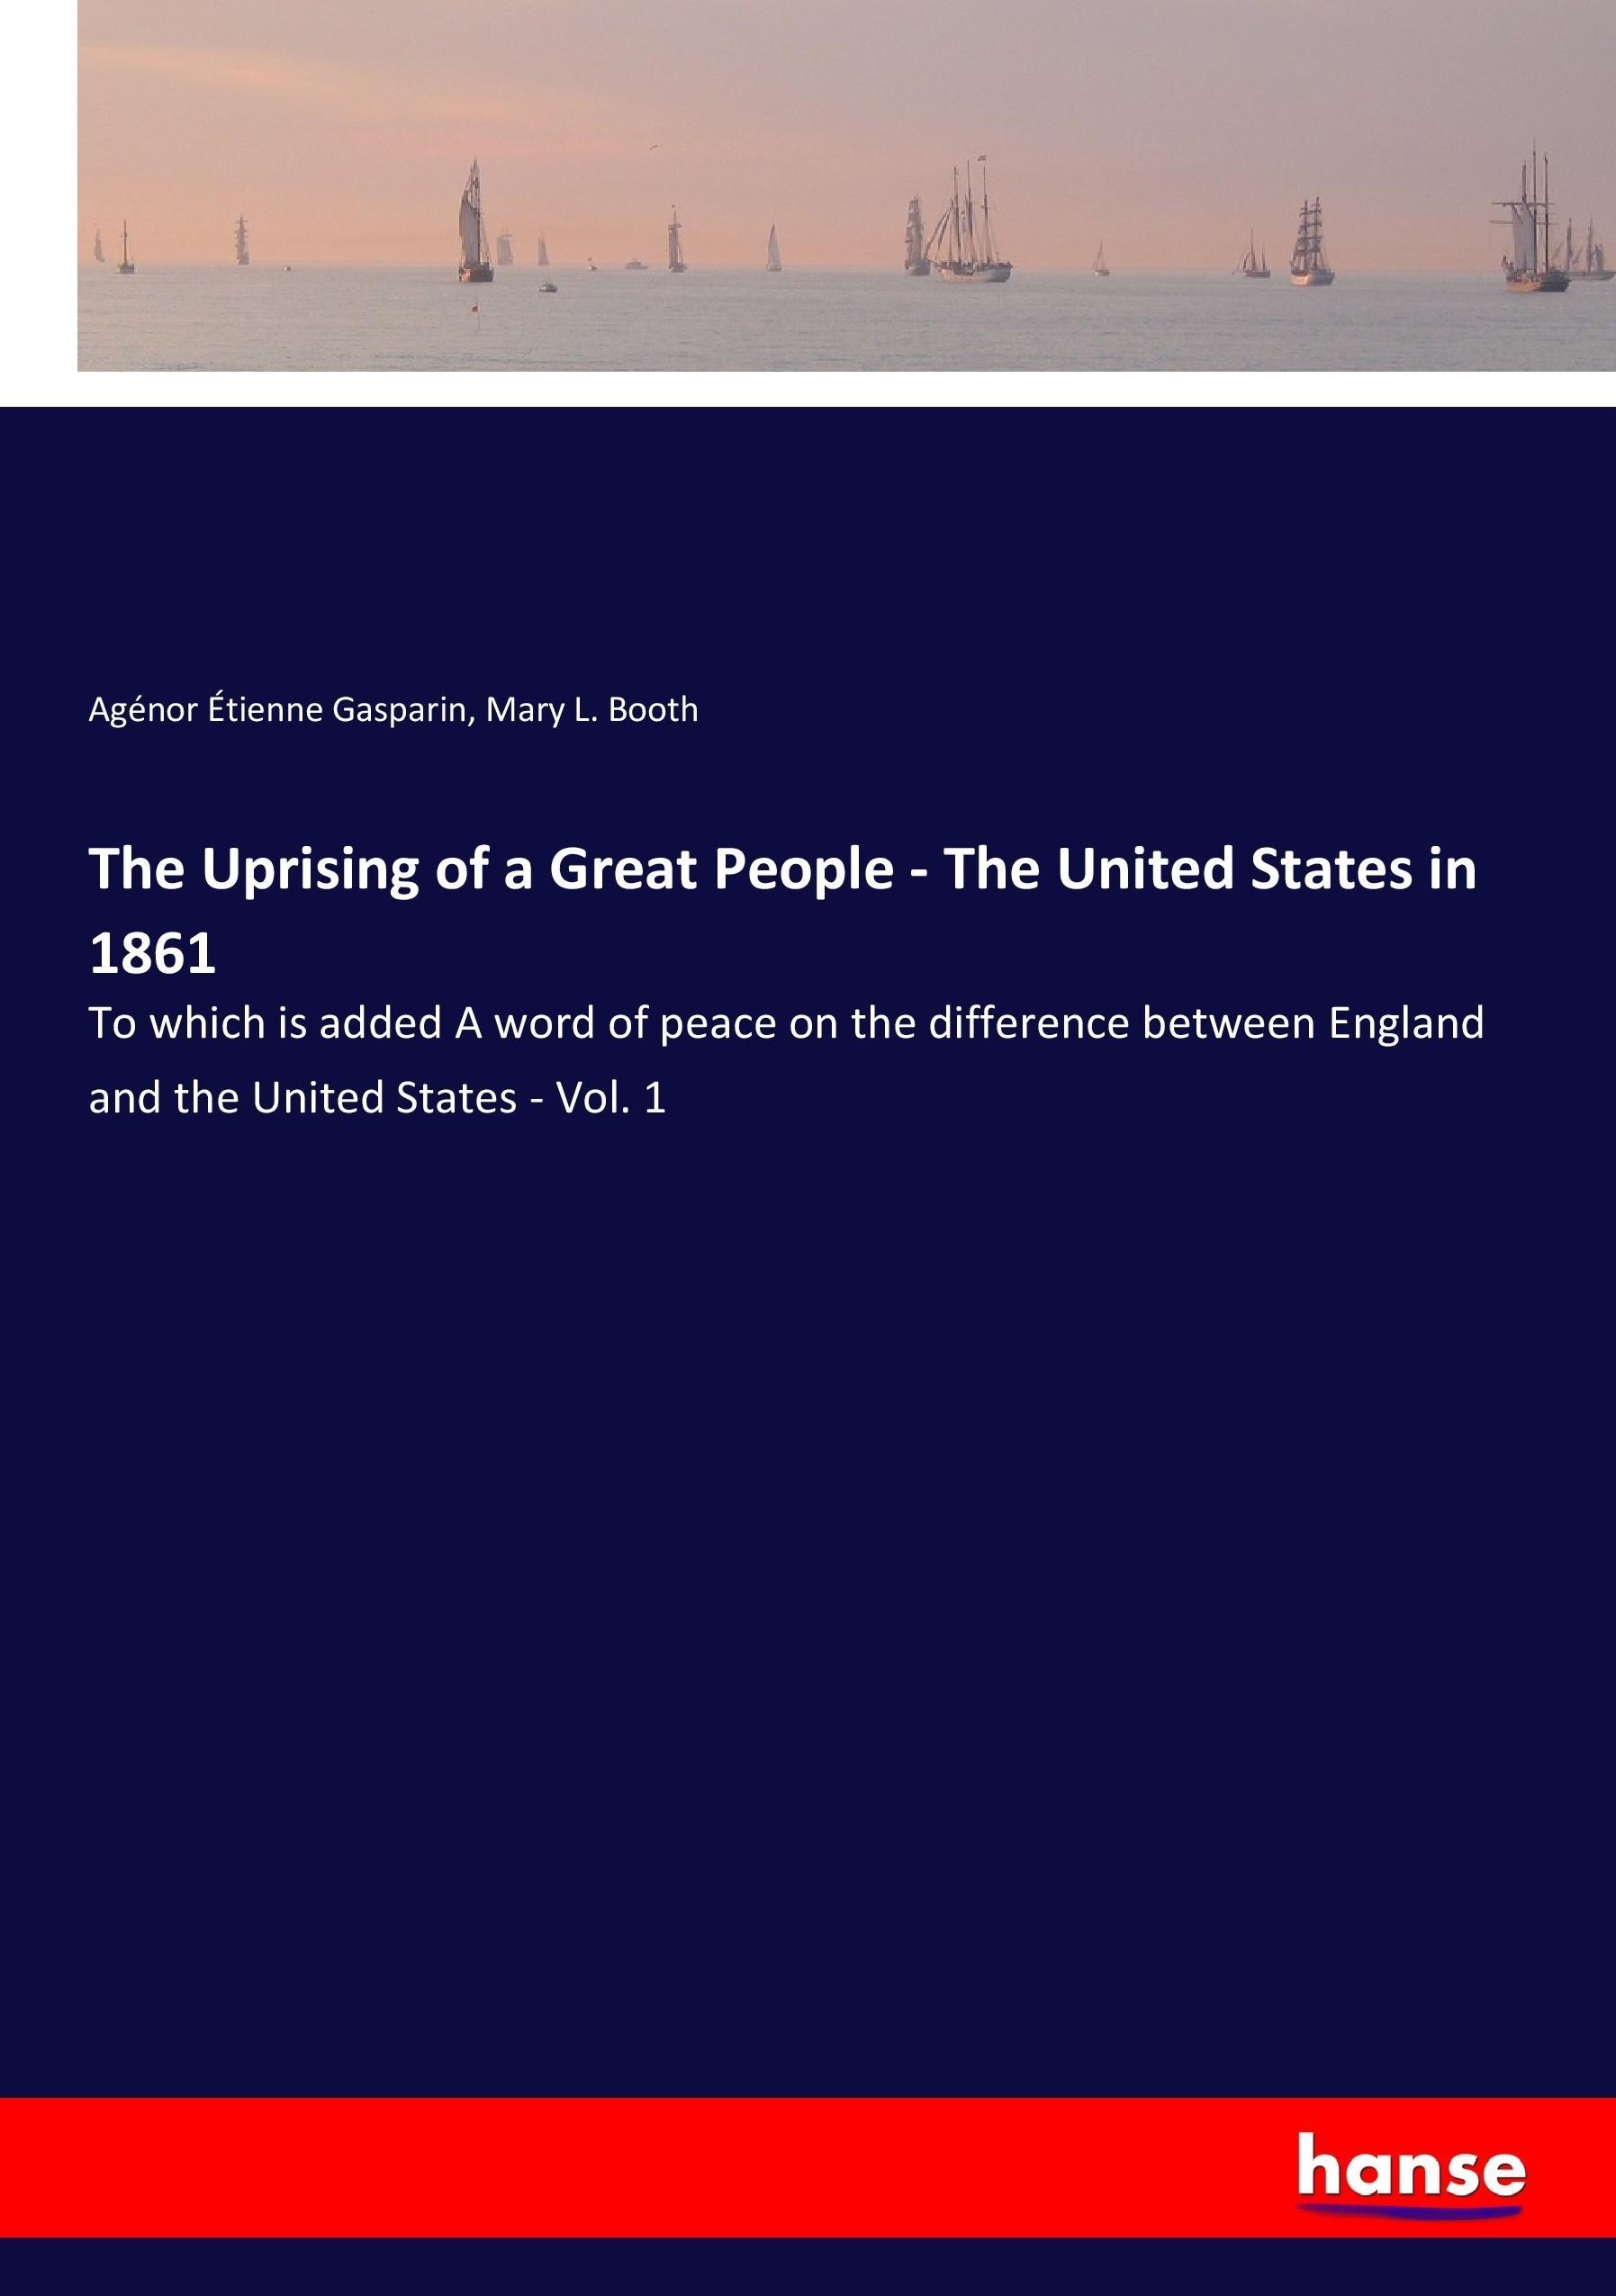 The Uprising of a Great People - The United States in 1861 - Gasparin, Agénor Étienne Booth, Mary L.